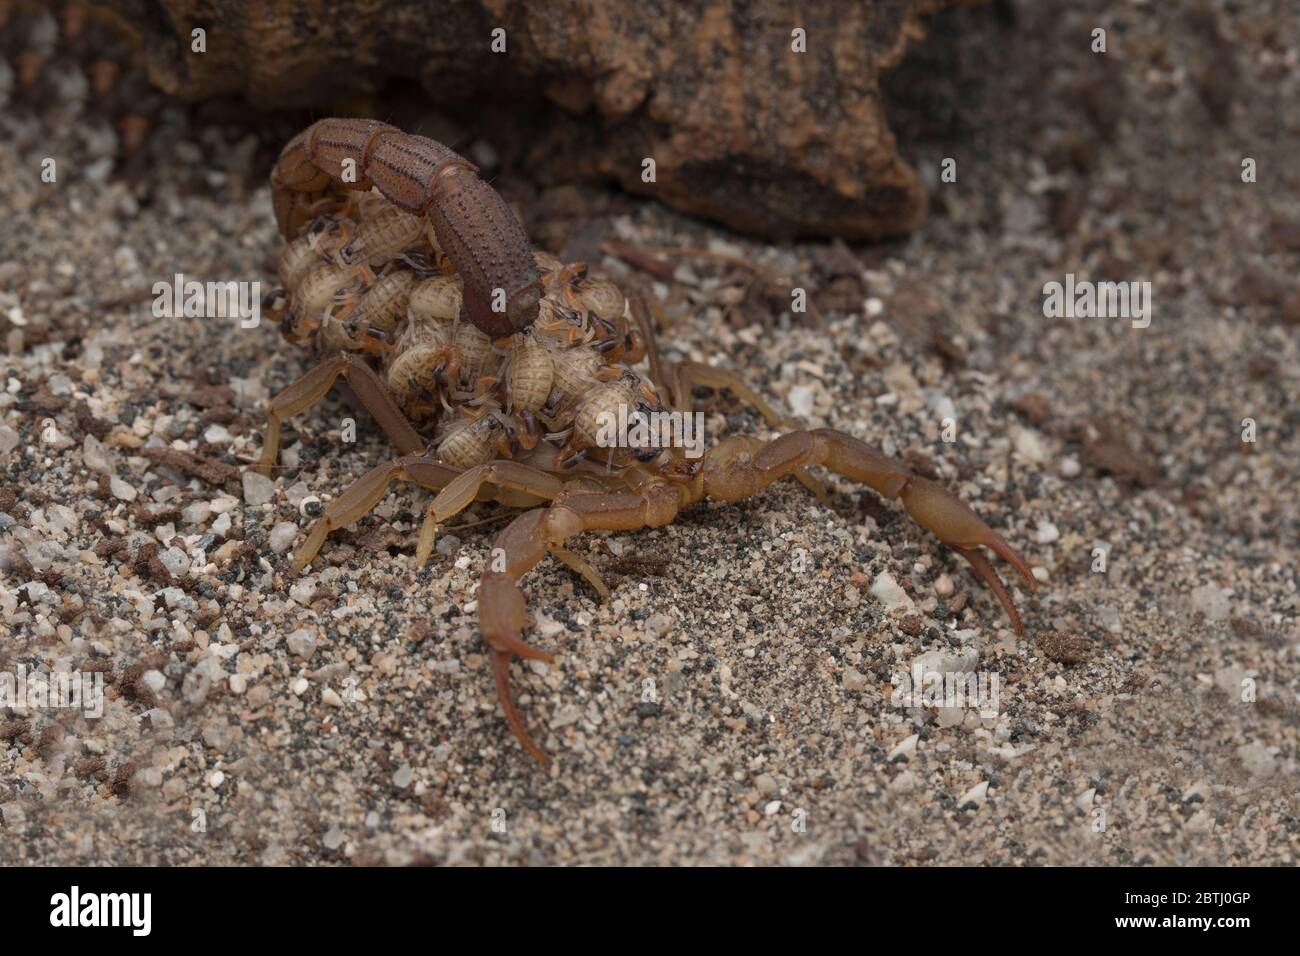 Female Hottentotta hottentotta (Fabricius, 1787) with babies Stock Photo